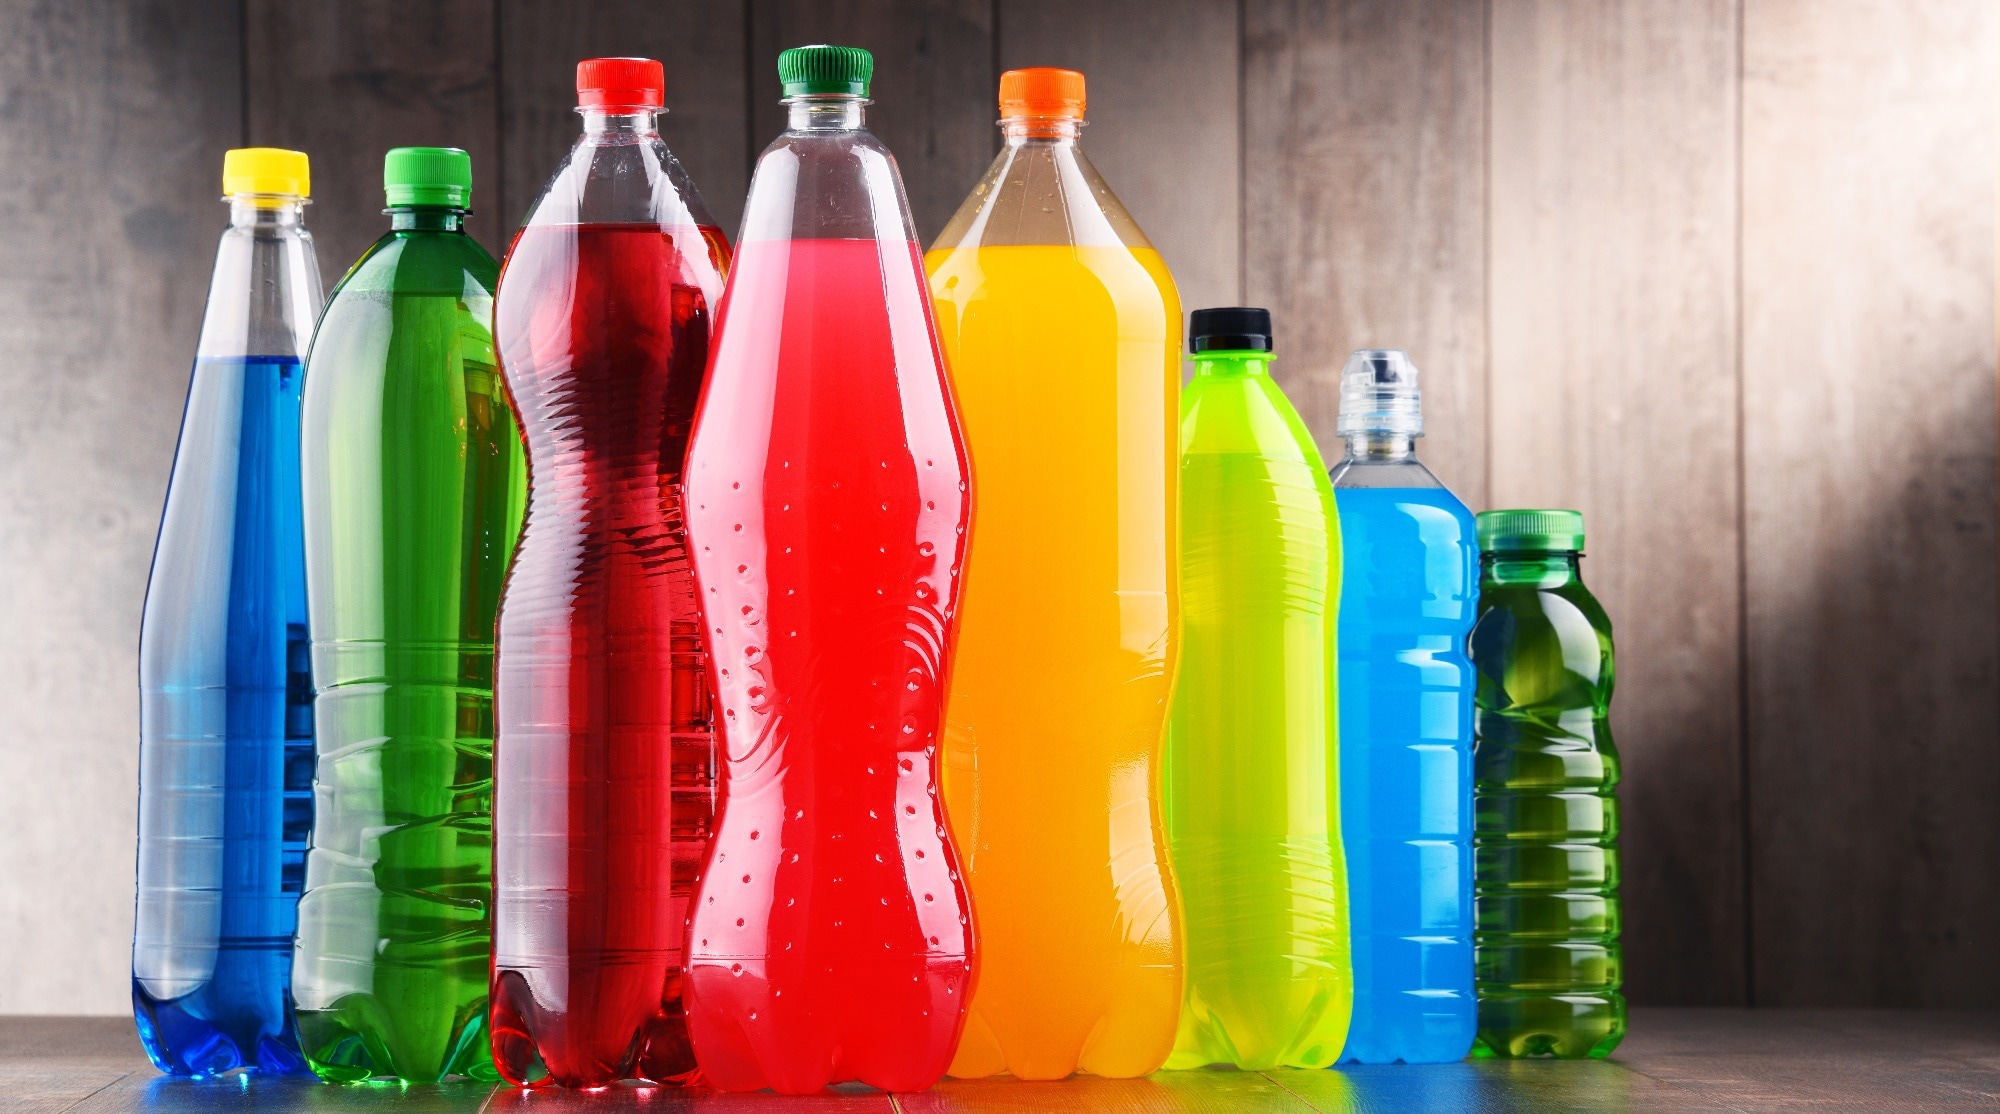 Are U.S. adolescents aware of the health risks associated with consuming sugary drinks?